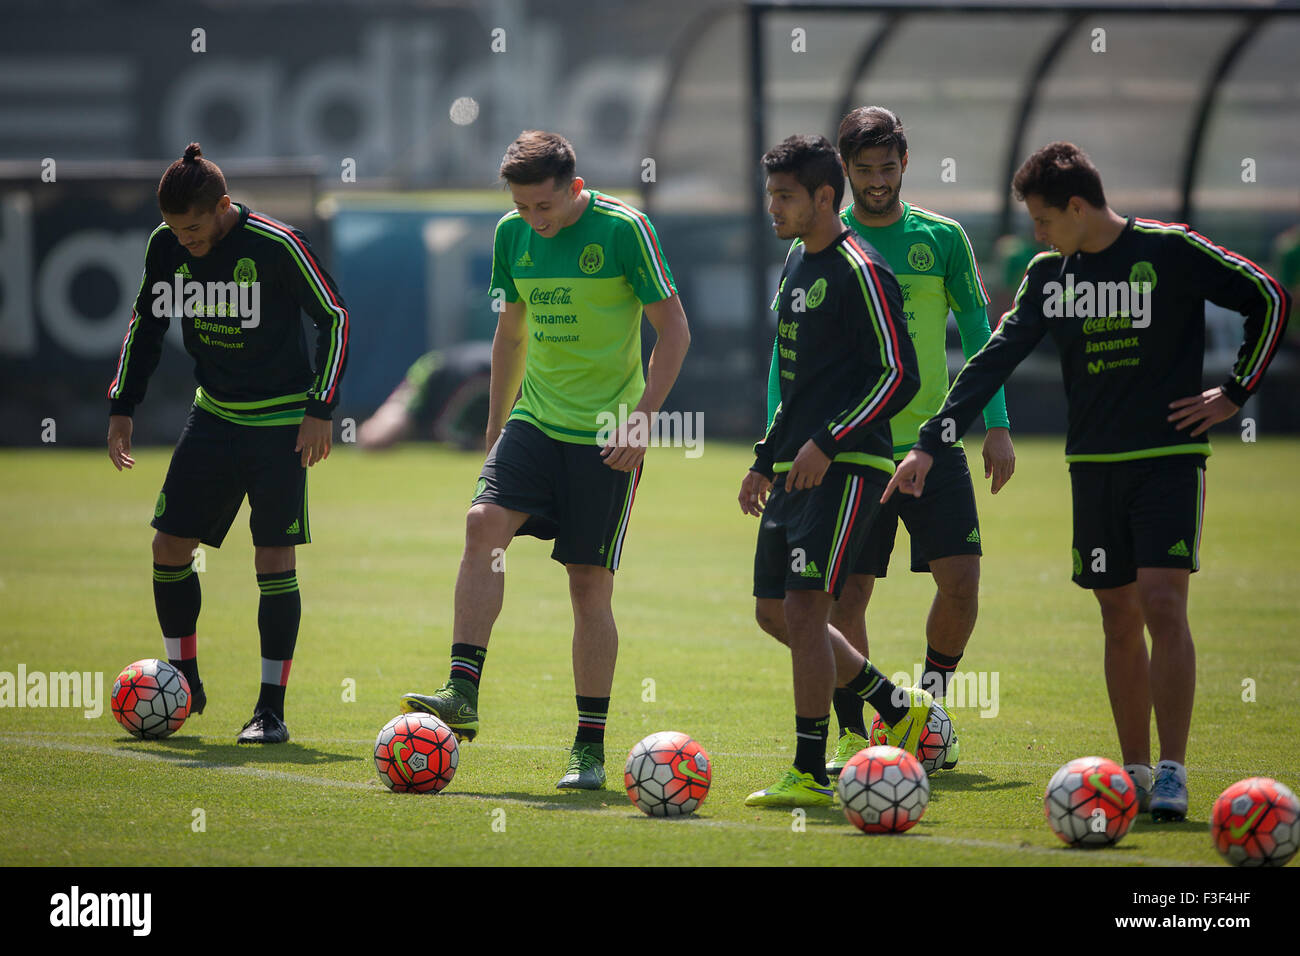 (151007) -- MEXICO CITY, Oct. 7, 2015 (Xinhua) -- (L to R) Mexico's national soccer team players Jonathan Dos Santos, Hector Herrera, Jesus Corona, Carlos Vela, y Javier Hernandez, take part in a training session at High Performance Center of the Mexican Football Federation (CAR-FEMEXFUT, for its acronym in Spanish), in Mexico City, capital of Mexico, Oct. 6, 2015. Mexican national soccer team held a training session on Tuesday ahead of its match against the United States national soccer team for a spot in the Confederations Cup Russia 2017, to be played on Oct. 10 at Rose Bowl stadium in Cali Stock Photo